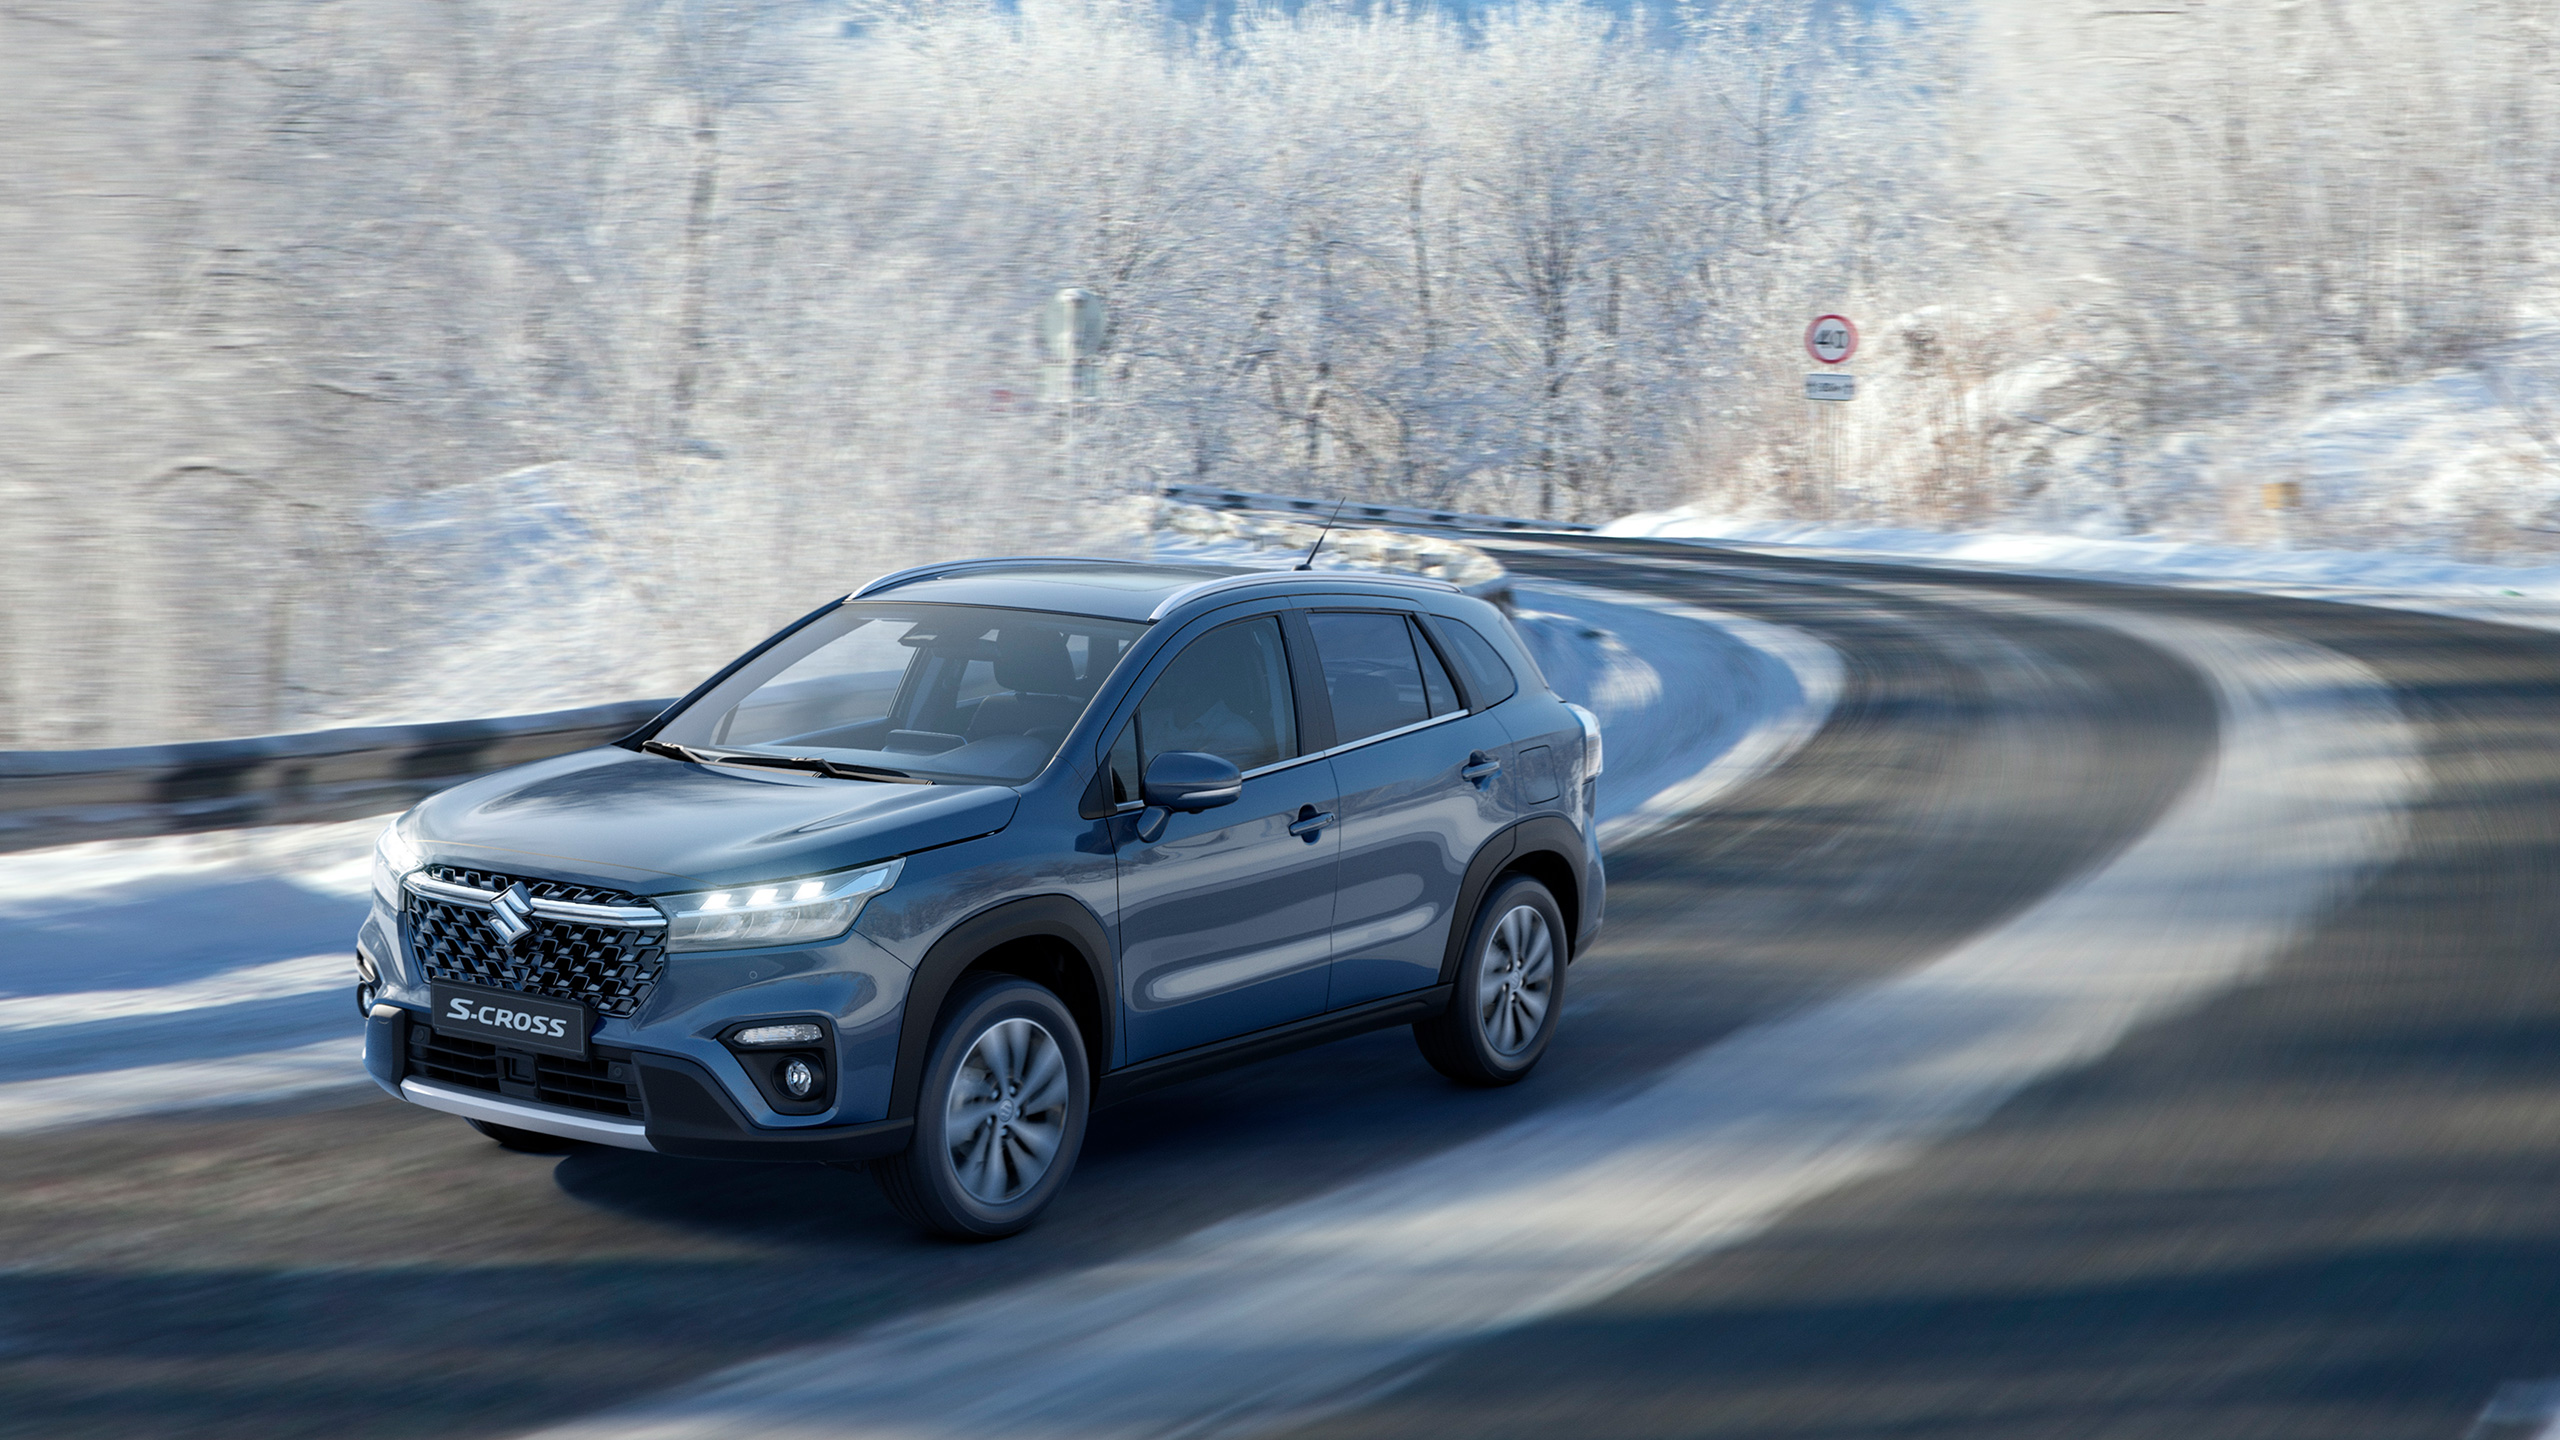 image_from_world_premiere_of_the_all-new_S-CROSS_front_snow